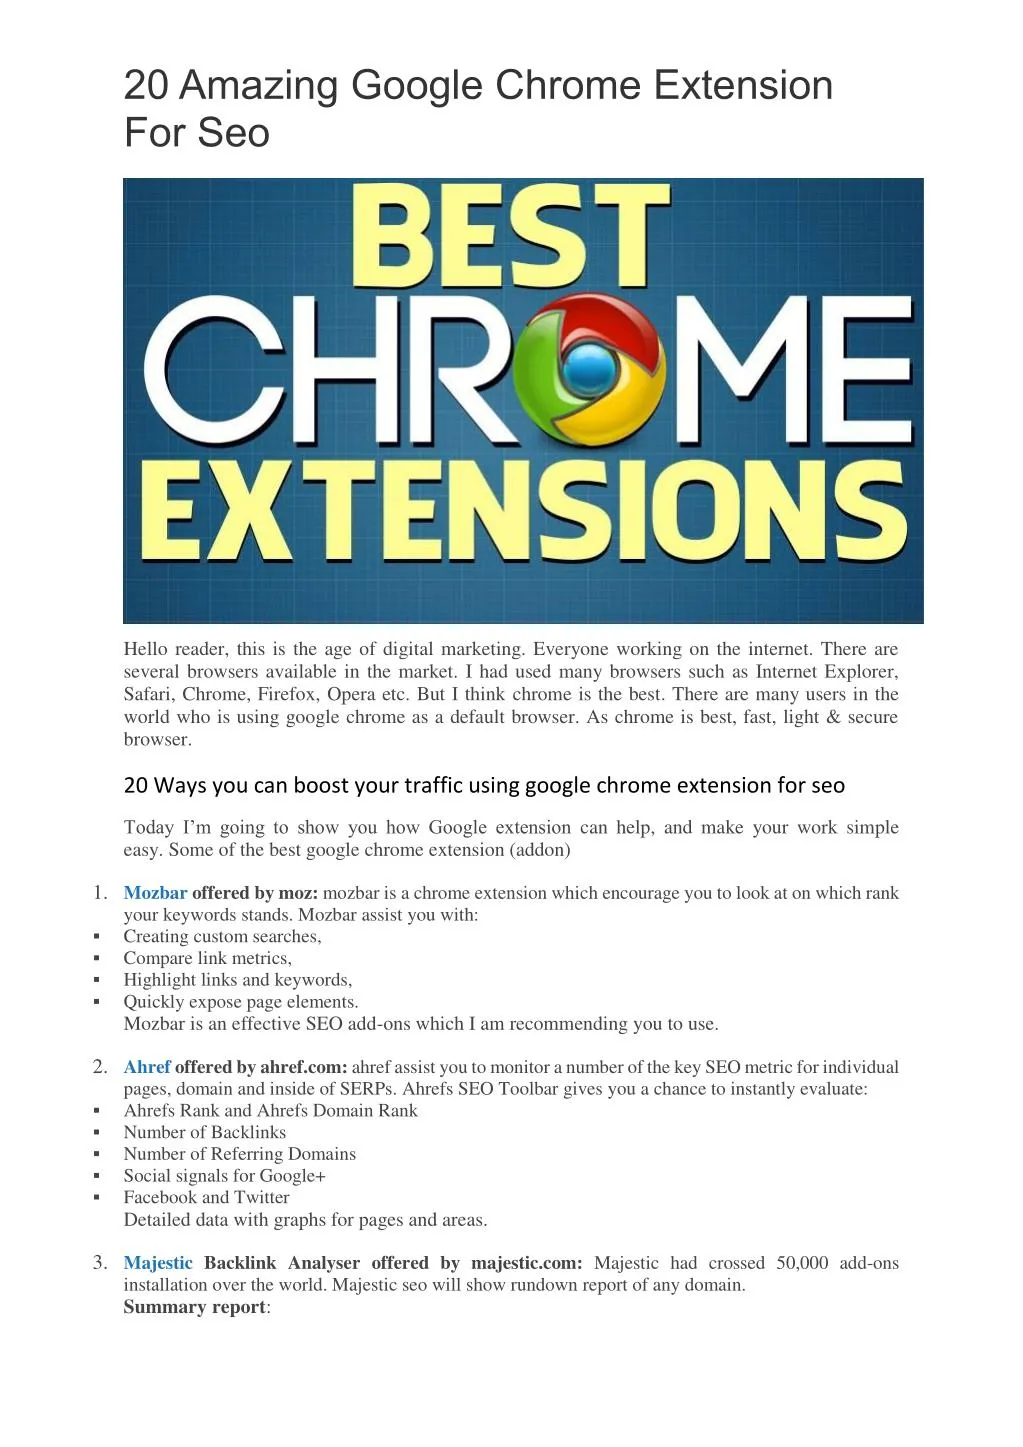 google chrome extensions for seo